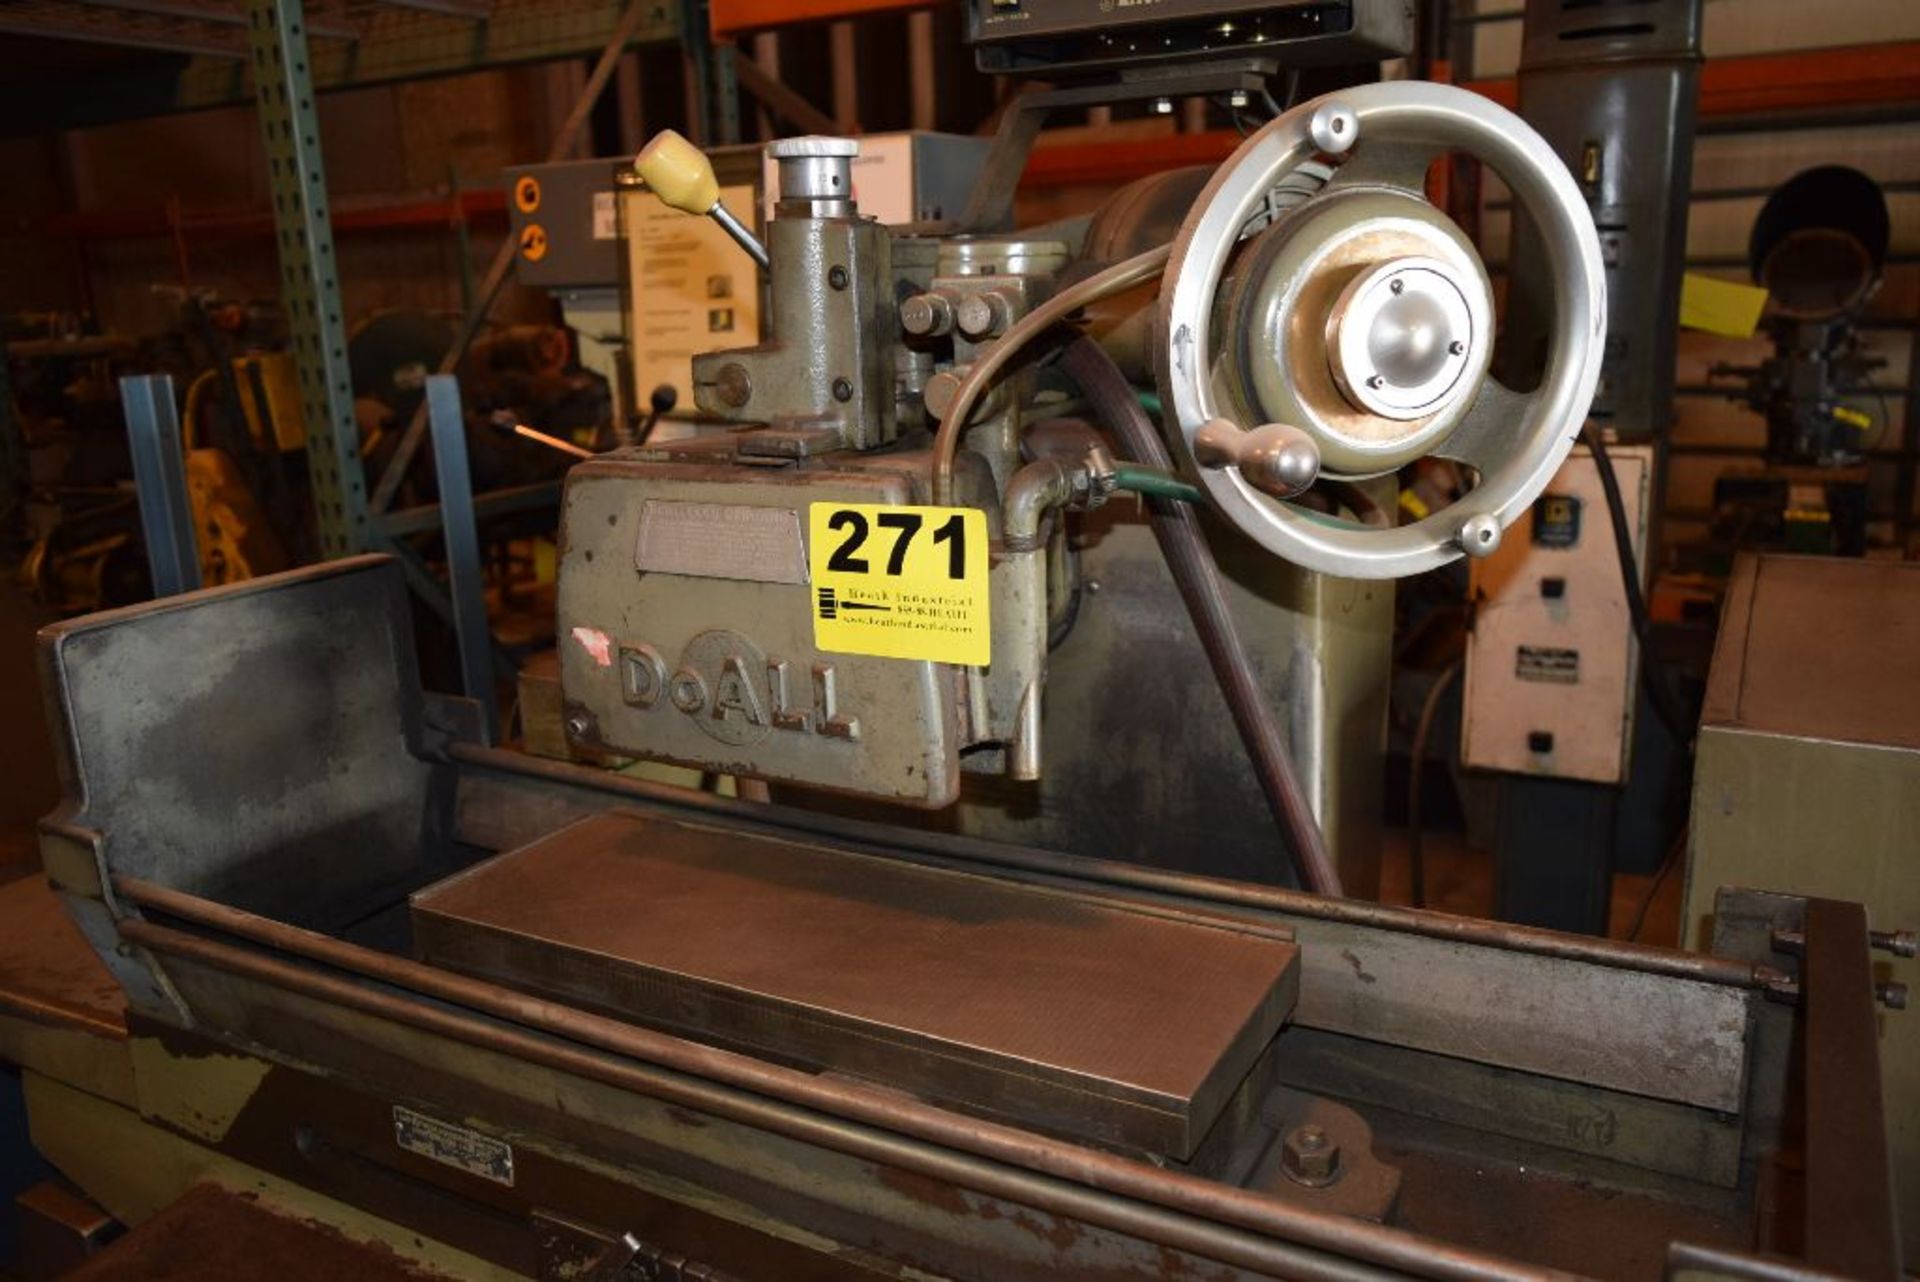 DOALL 6”X18” MODEL D618-7 HYDRAULIC SURFACE GRINDER, S/N 219-67384, WITH MITUTOYO DIGITAL CONTROL - Image 3 of 4